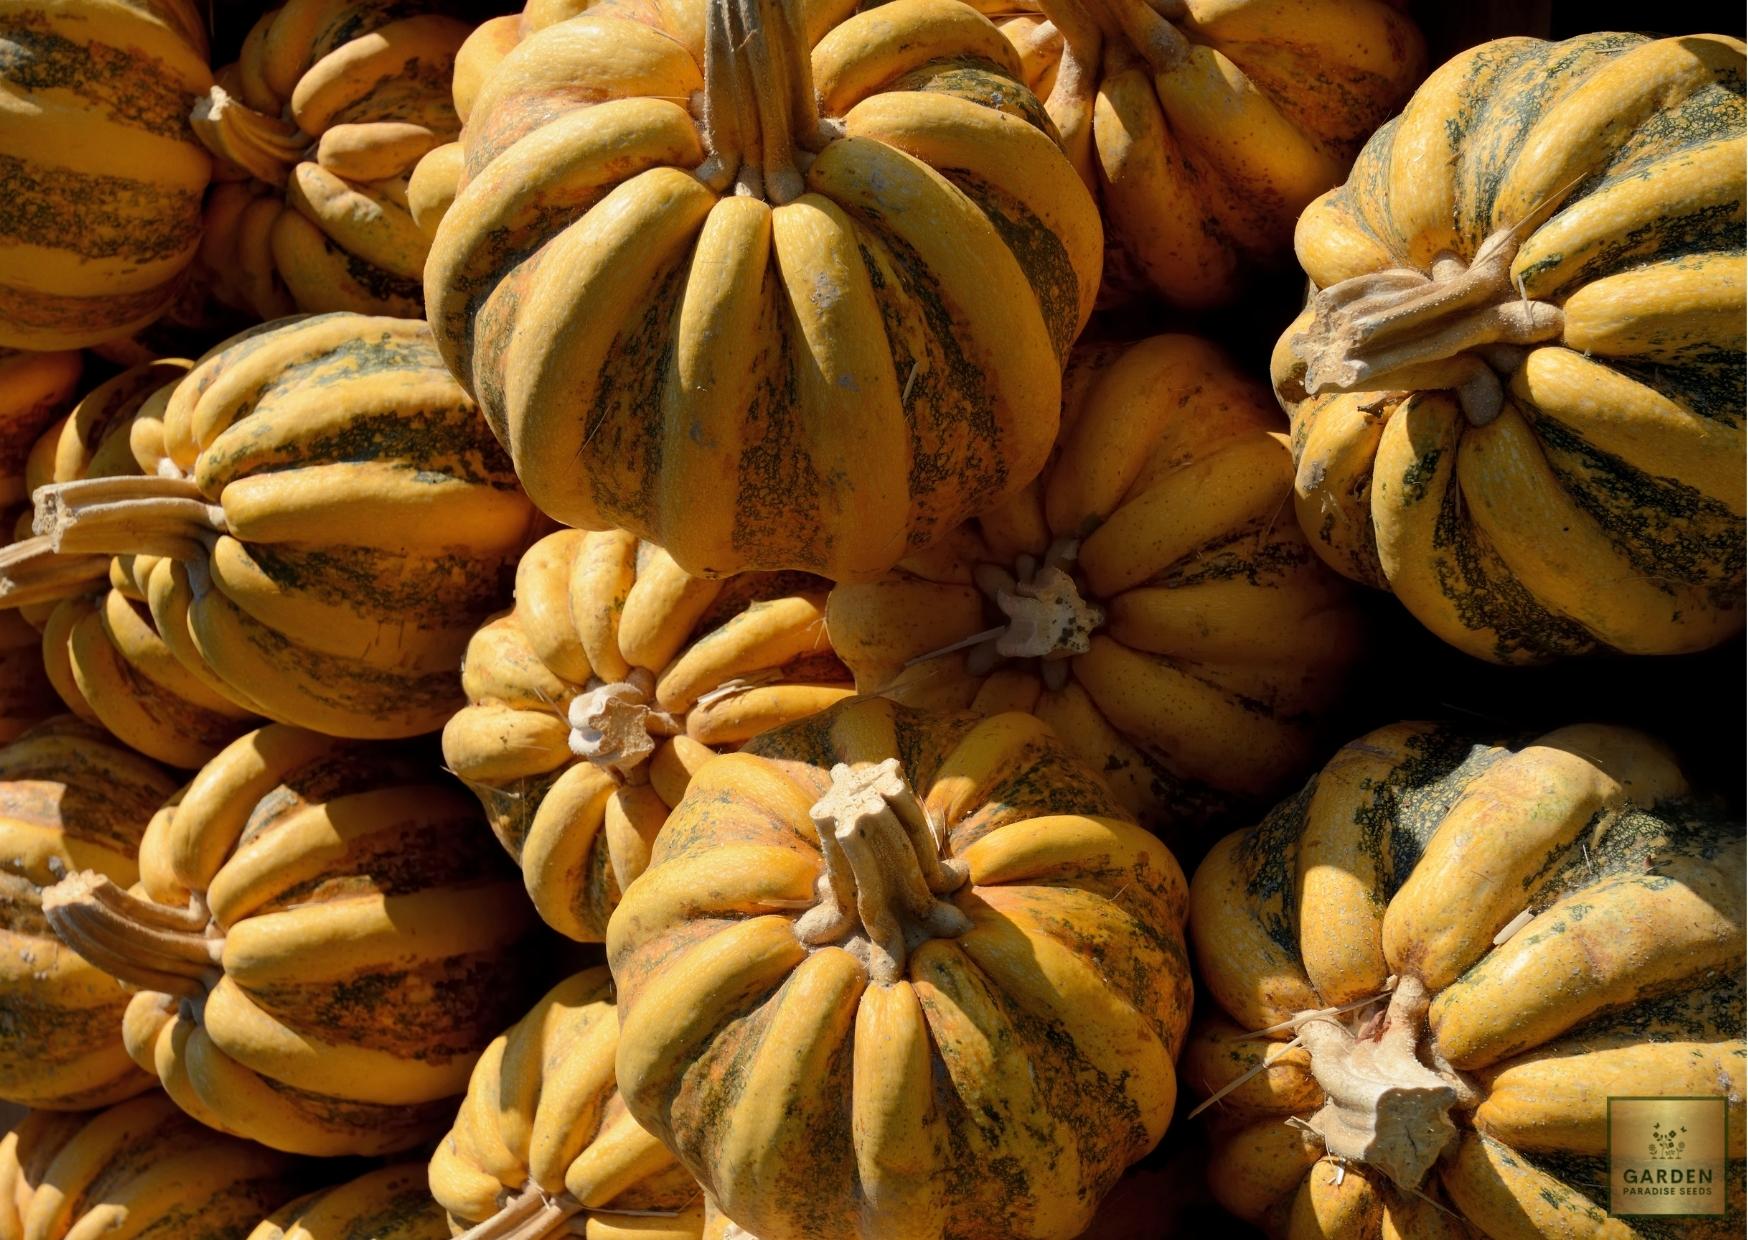 Capture the Season: Purchase Musk Pumpkin Seeds for Wholesome Fun